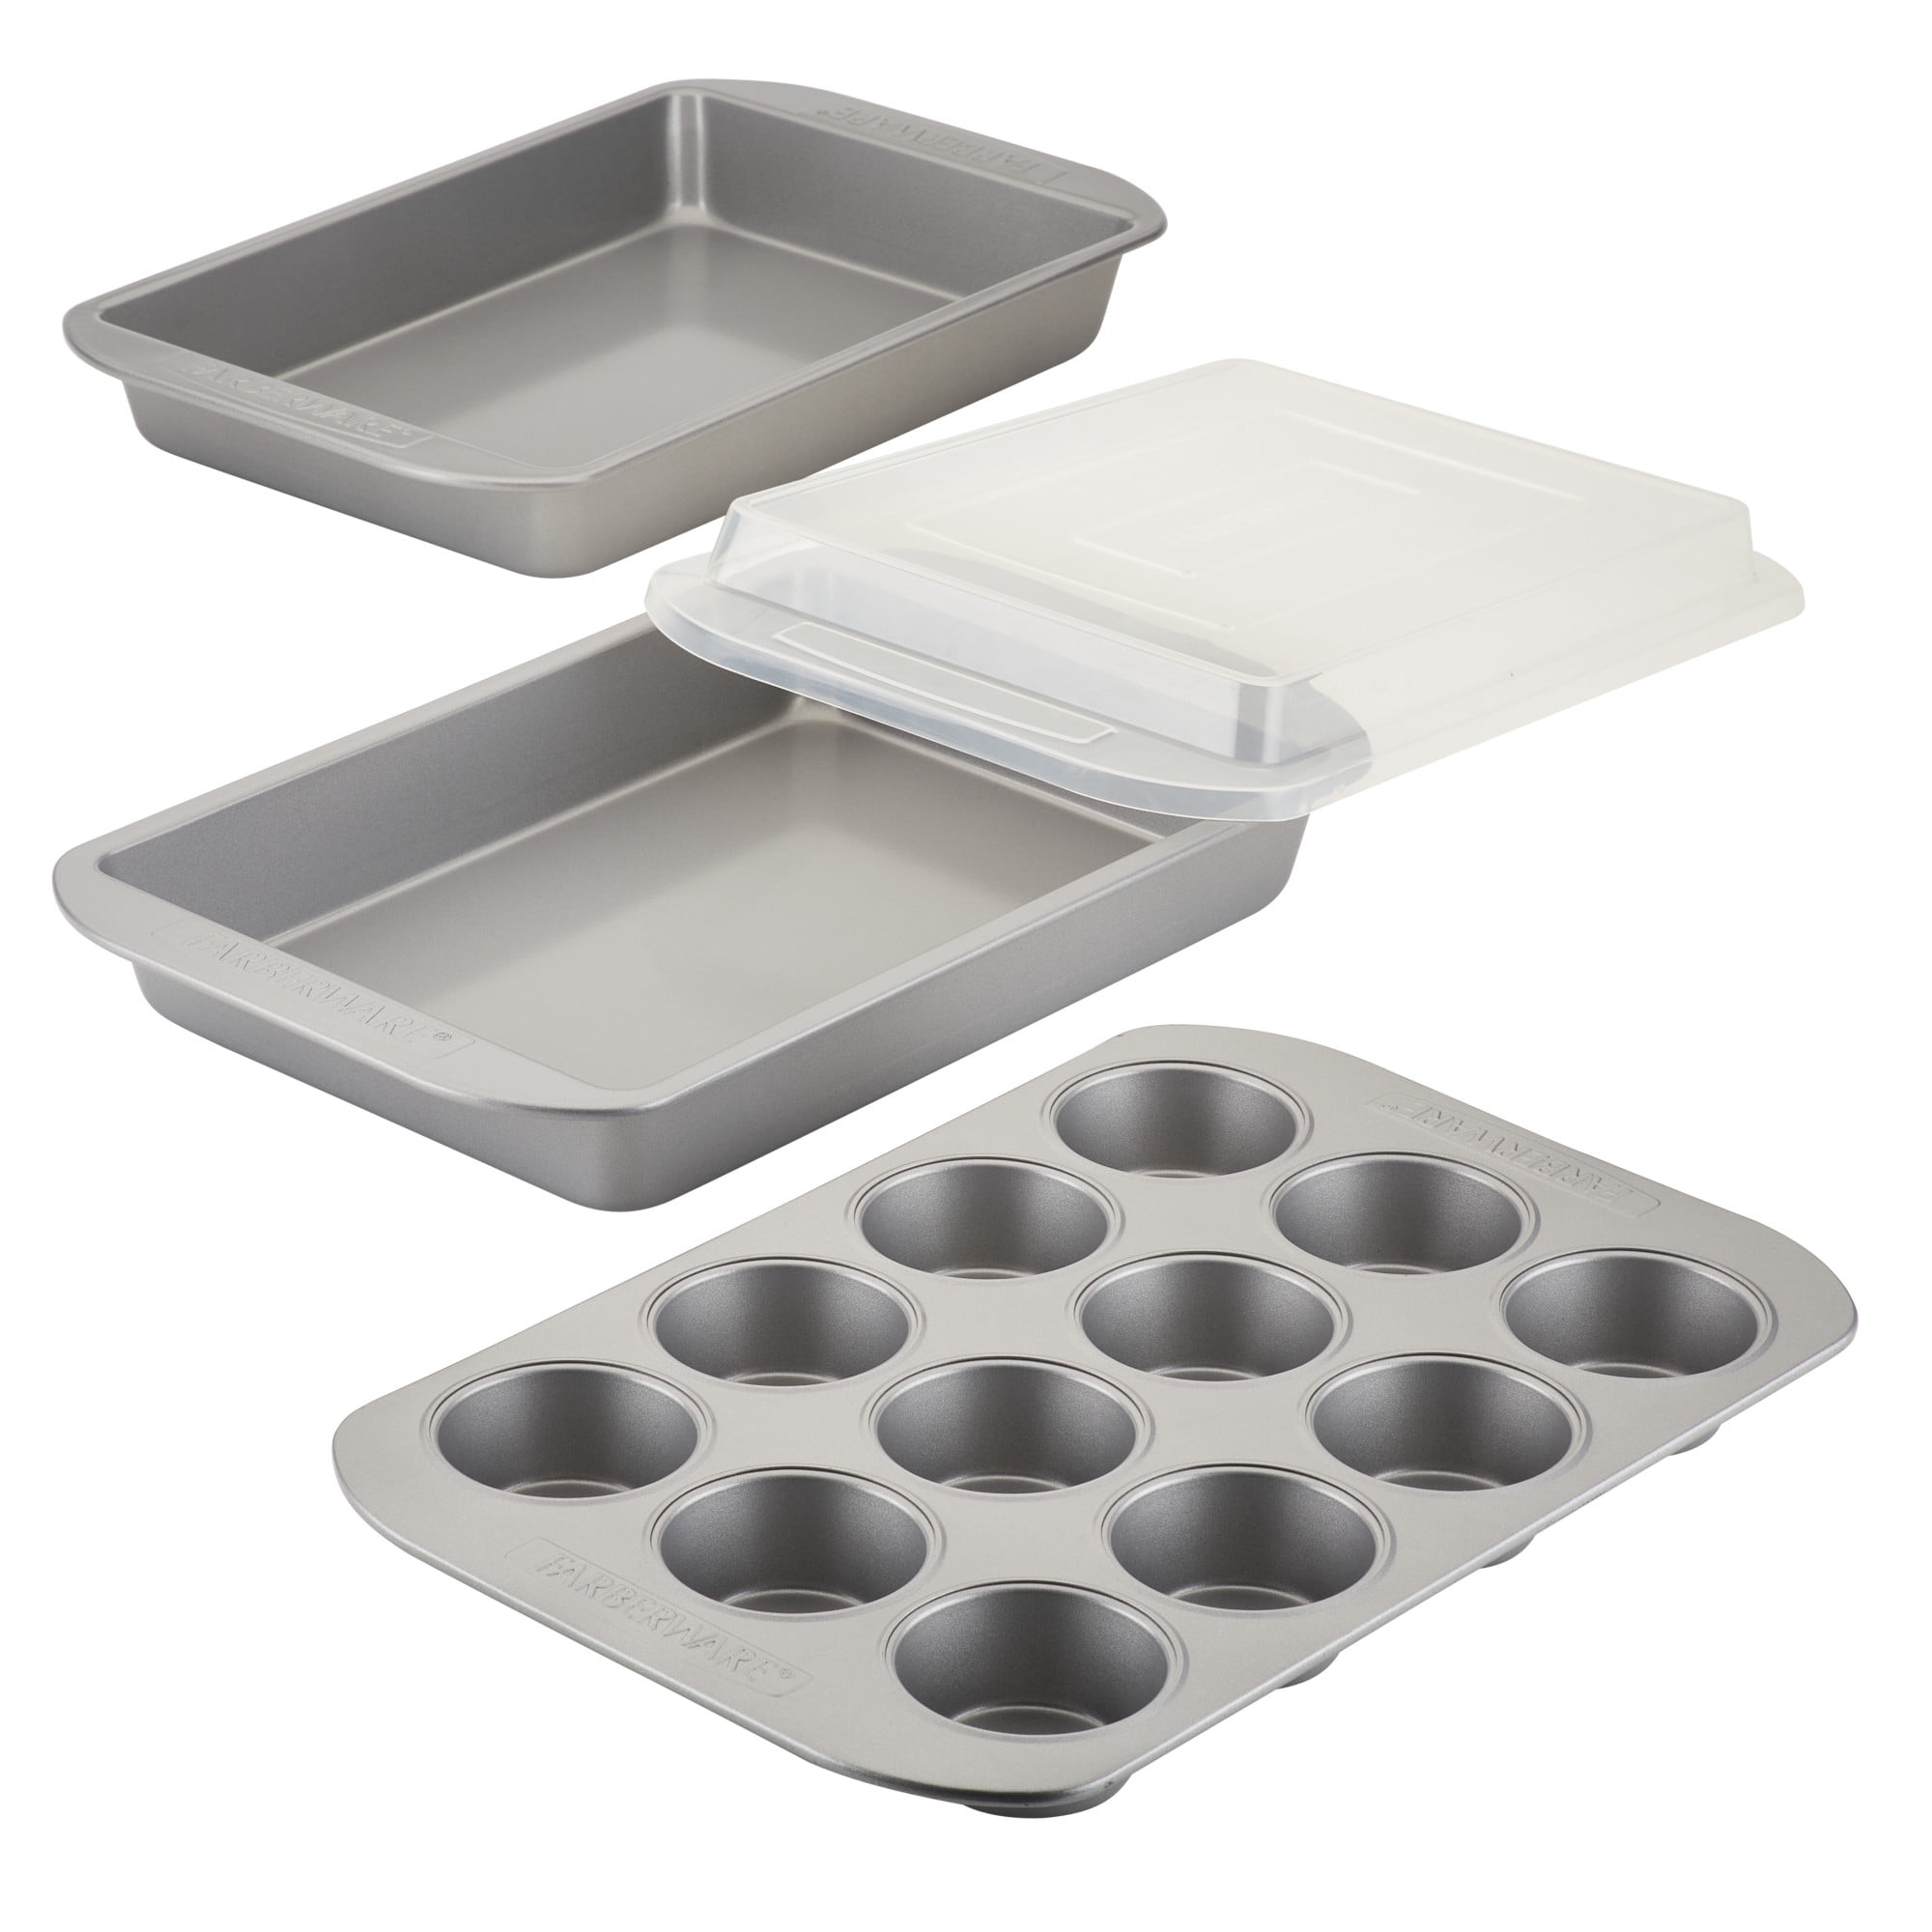 La Rochelle 7 Pc. Ceramic Bakeware Set With Square and Round Pans, Rustic  Farmhouse Dishes for Baking, Cooking, Lasagna, and Pastries, 